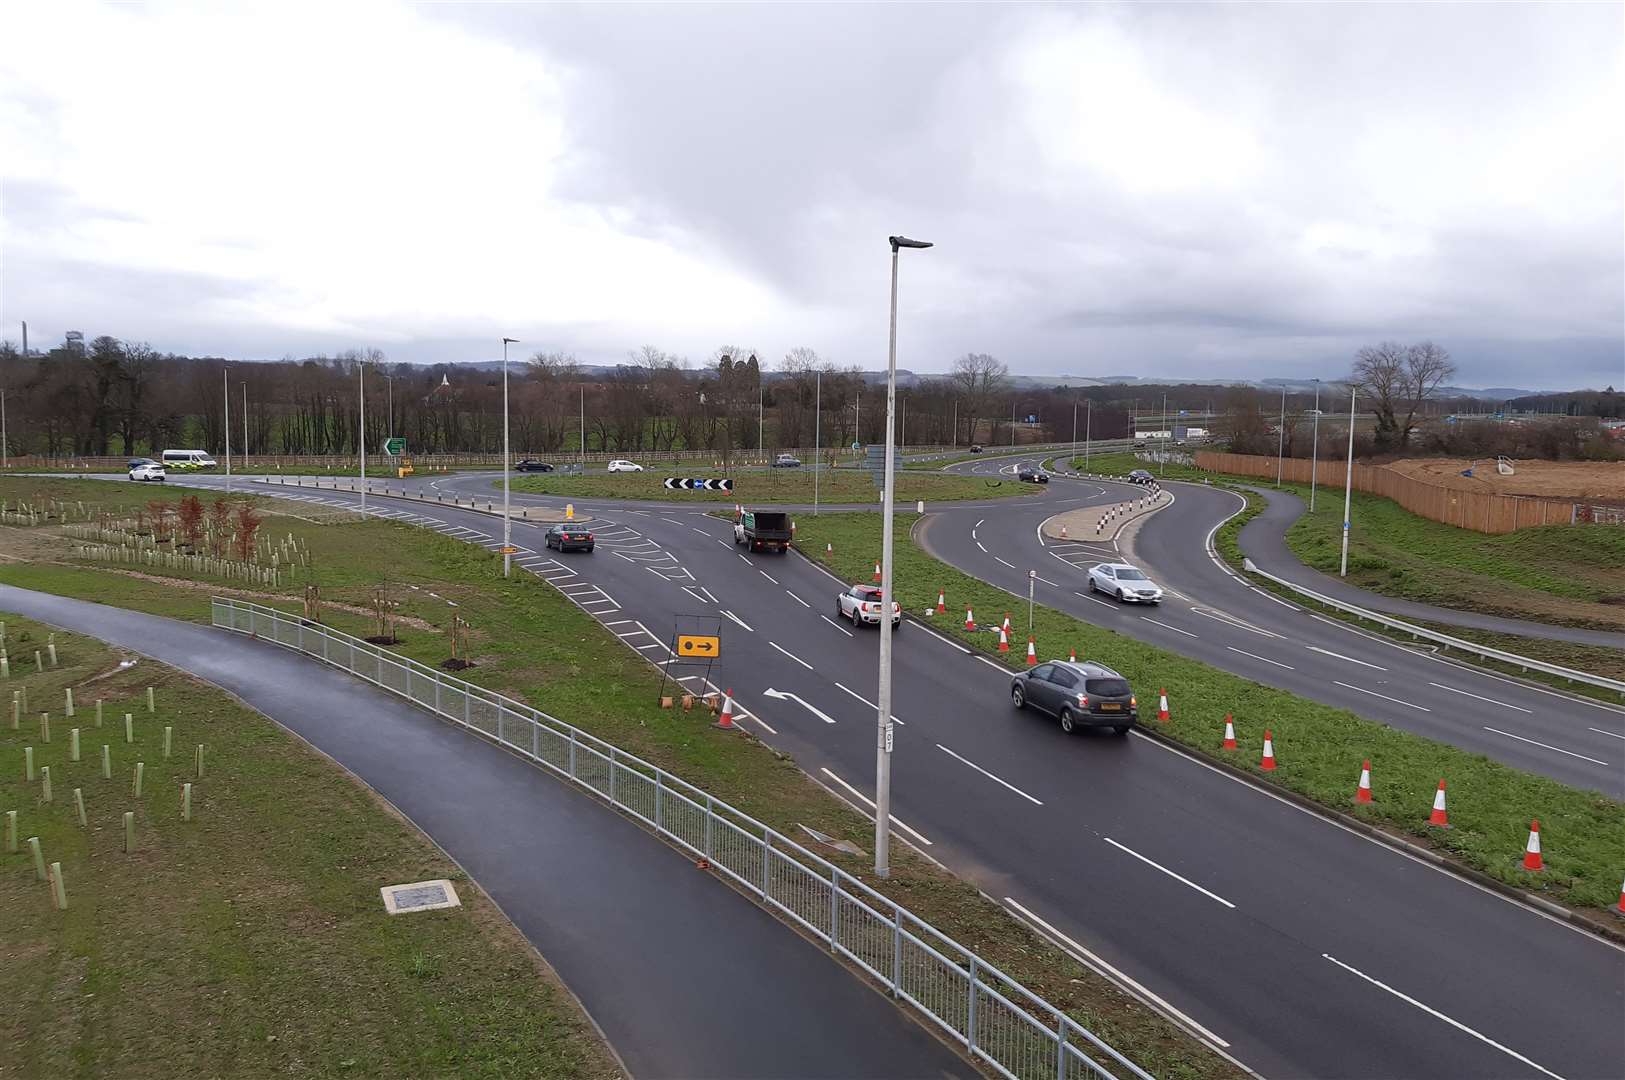 The A2070 link road roundabout forms part of the diversion route